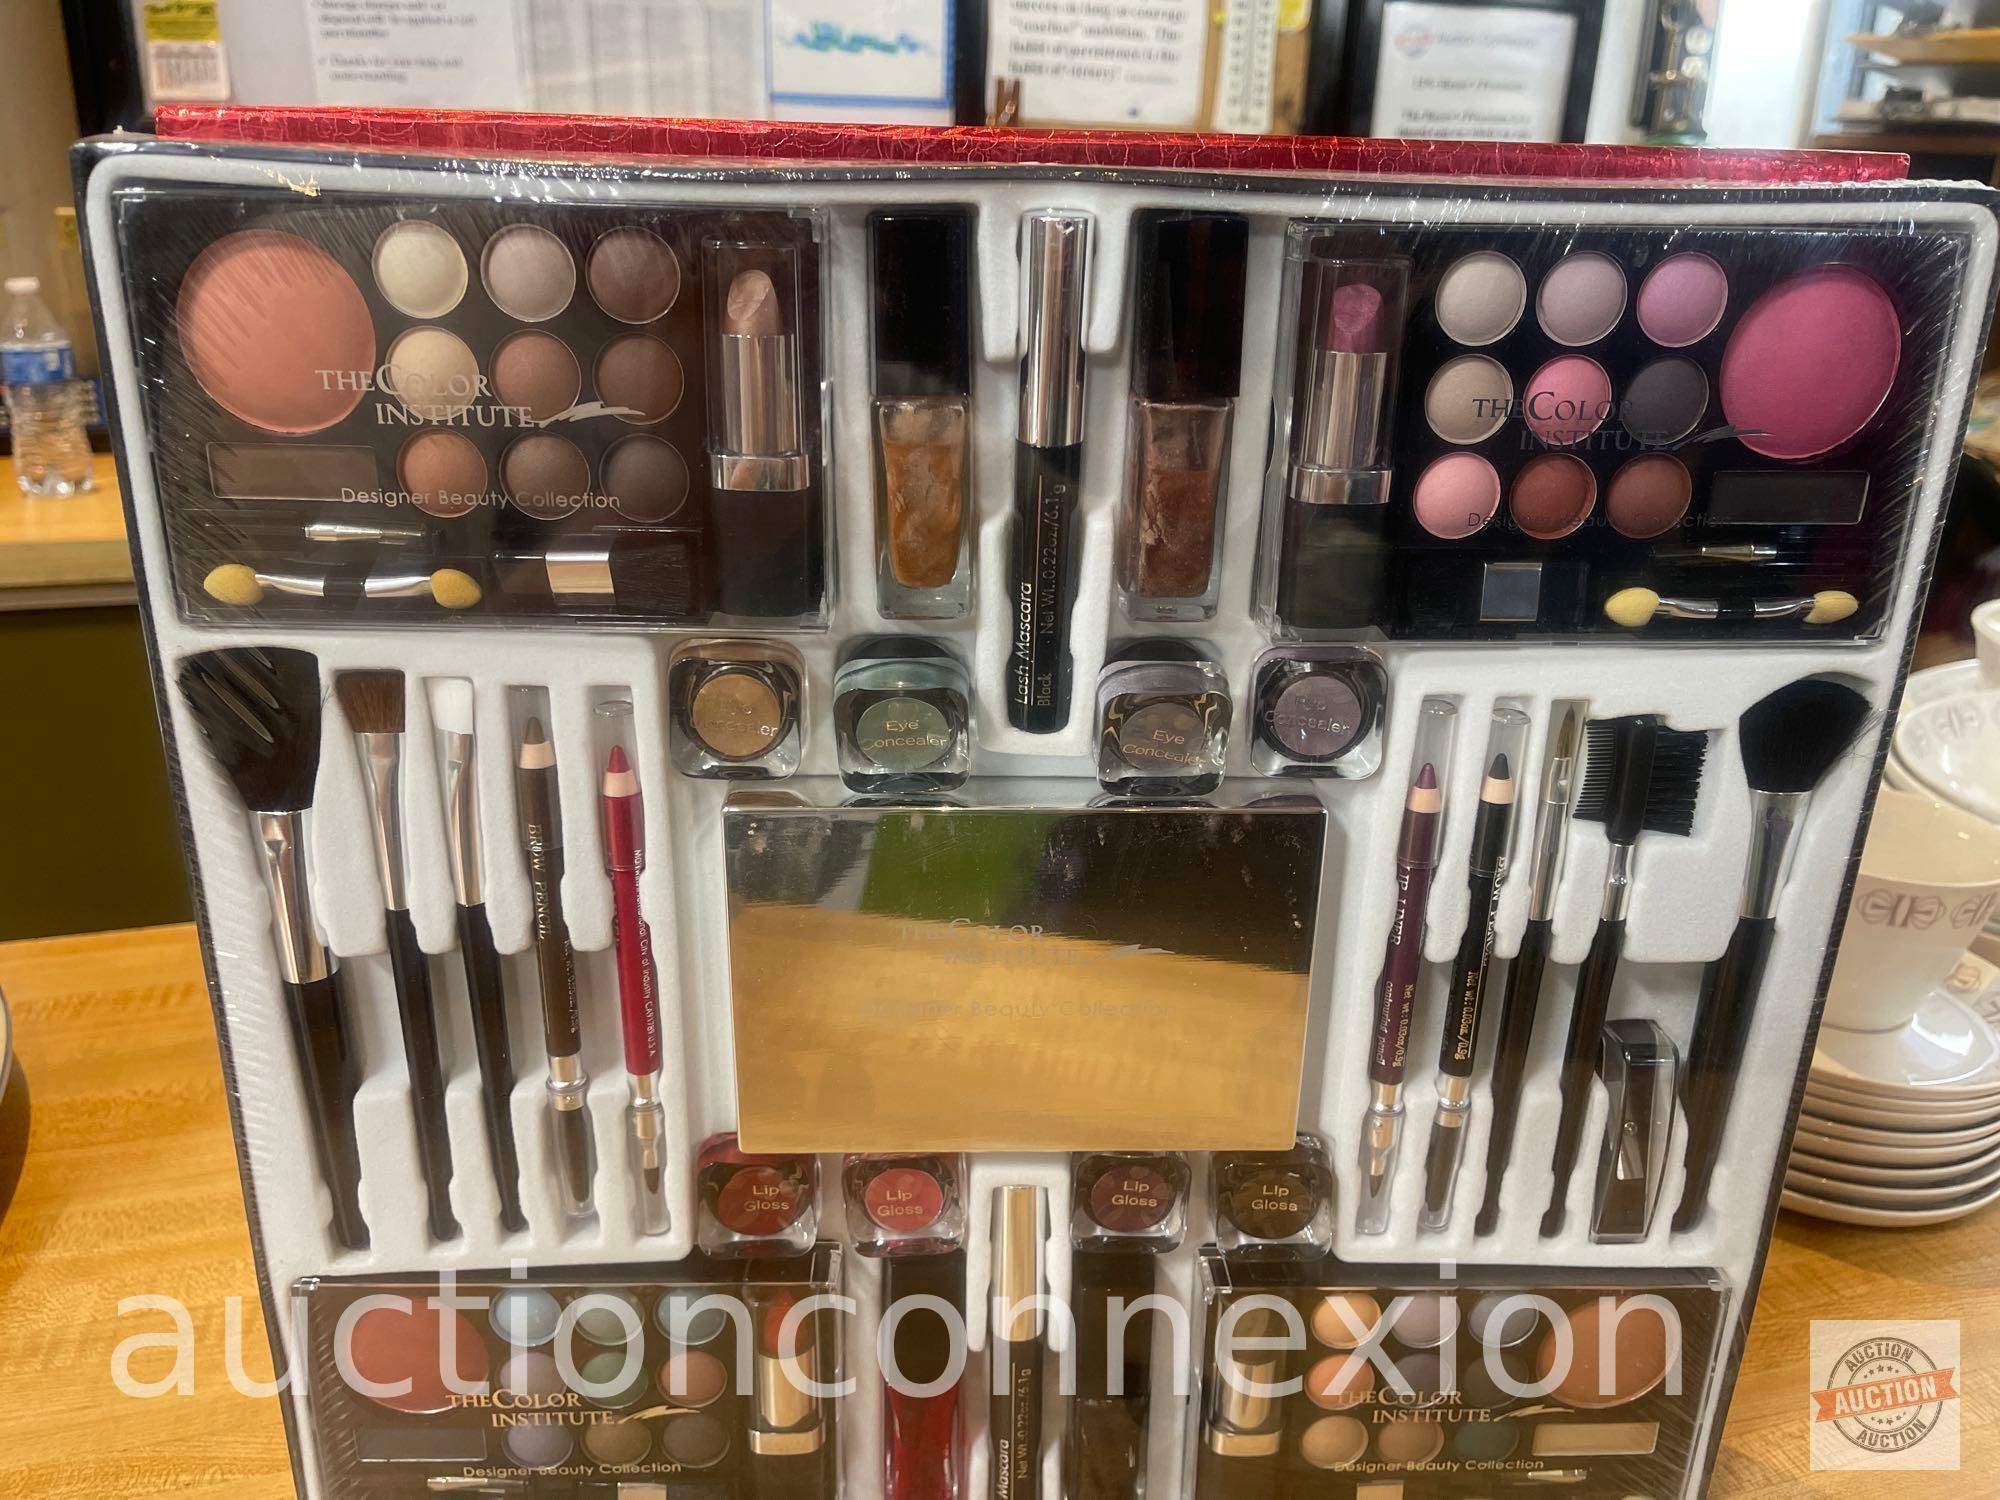 The Color Institute Designer Beauty, Makeup collection, unopened still in plastic